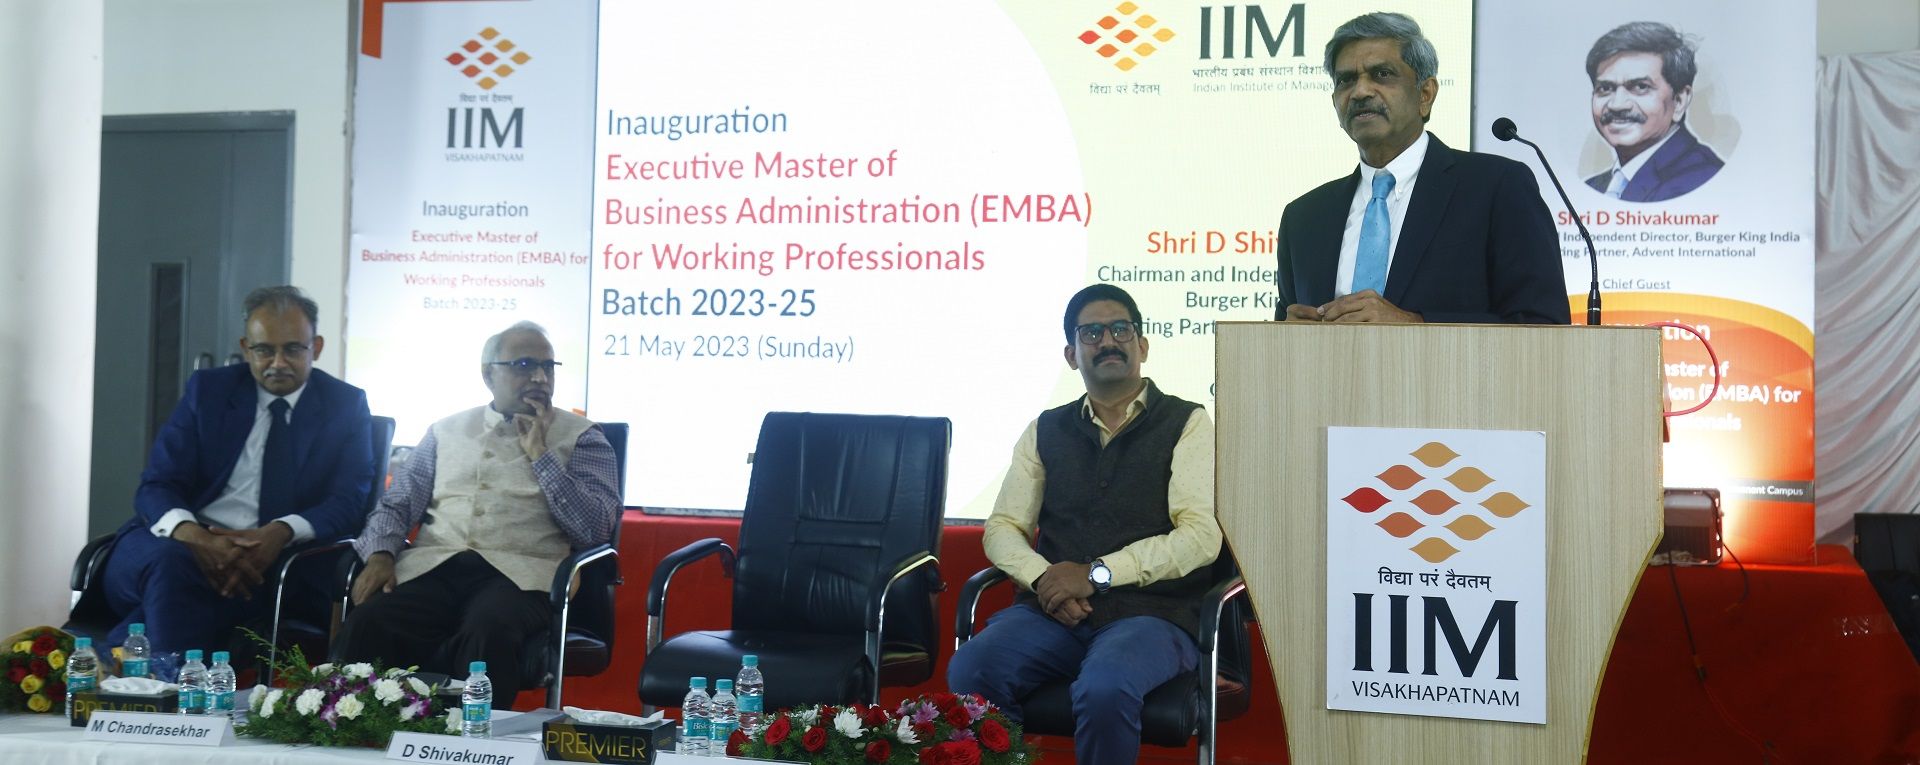 IIM Visakhapatnam Inaugurated the 1st batch of the Executive MBA for Working Professionals